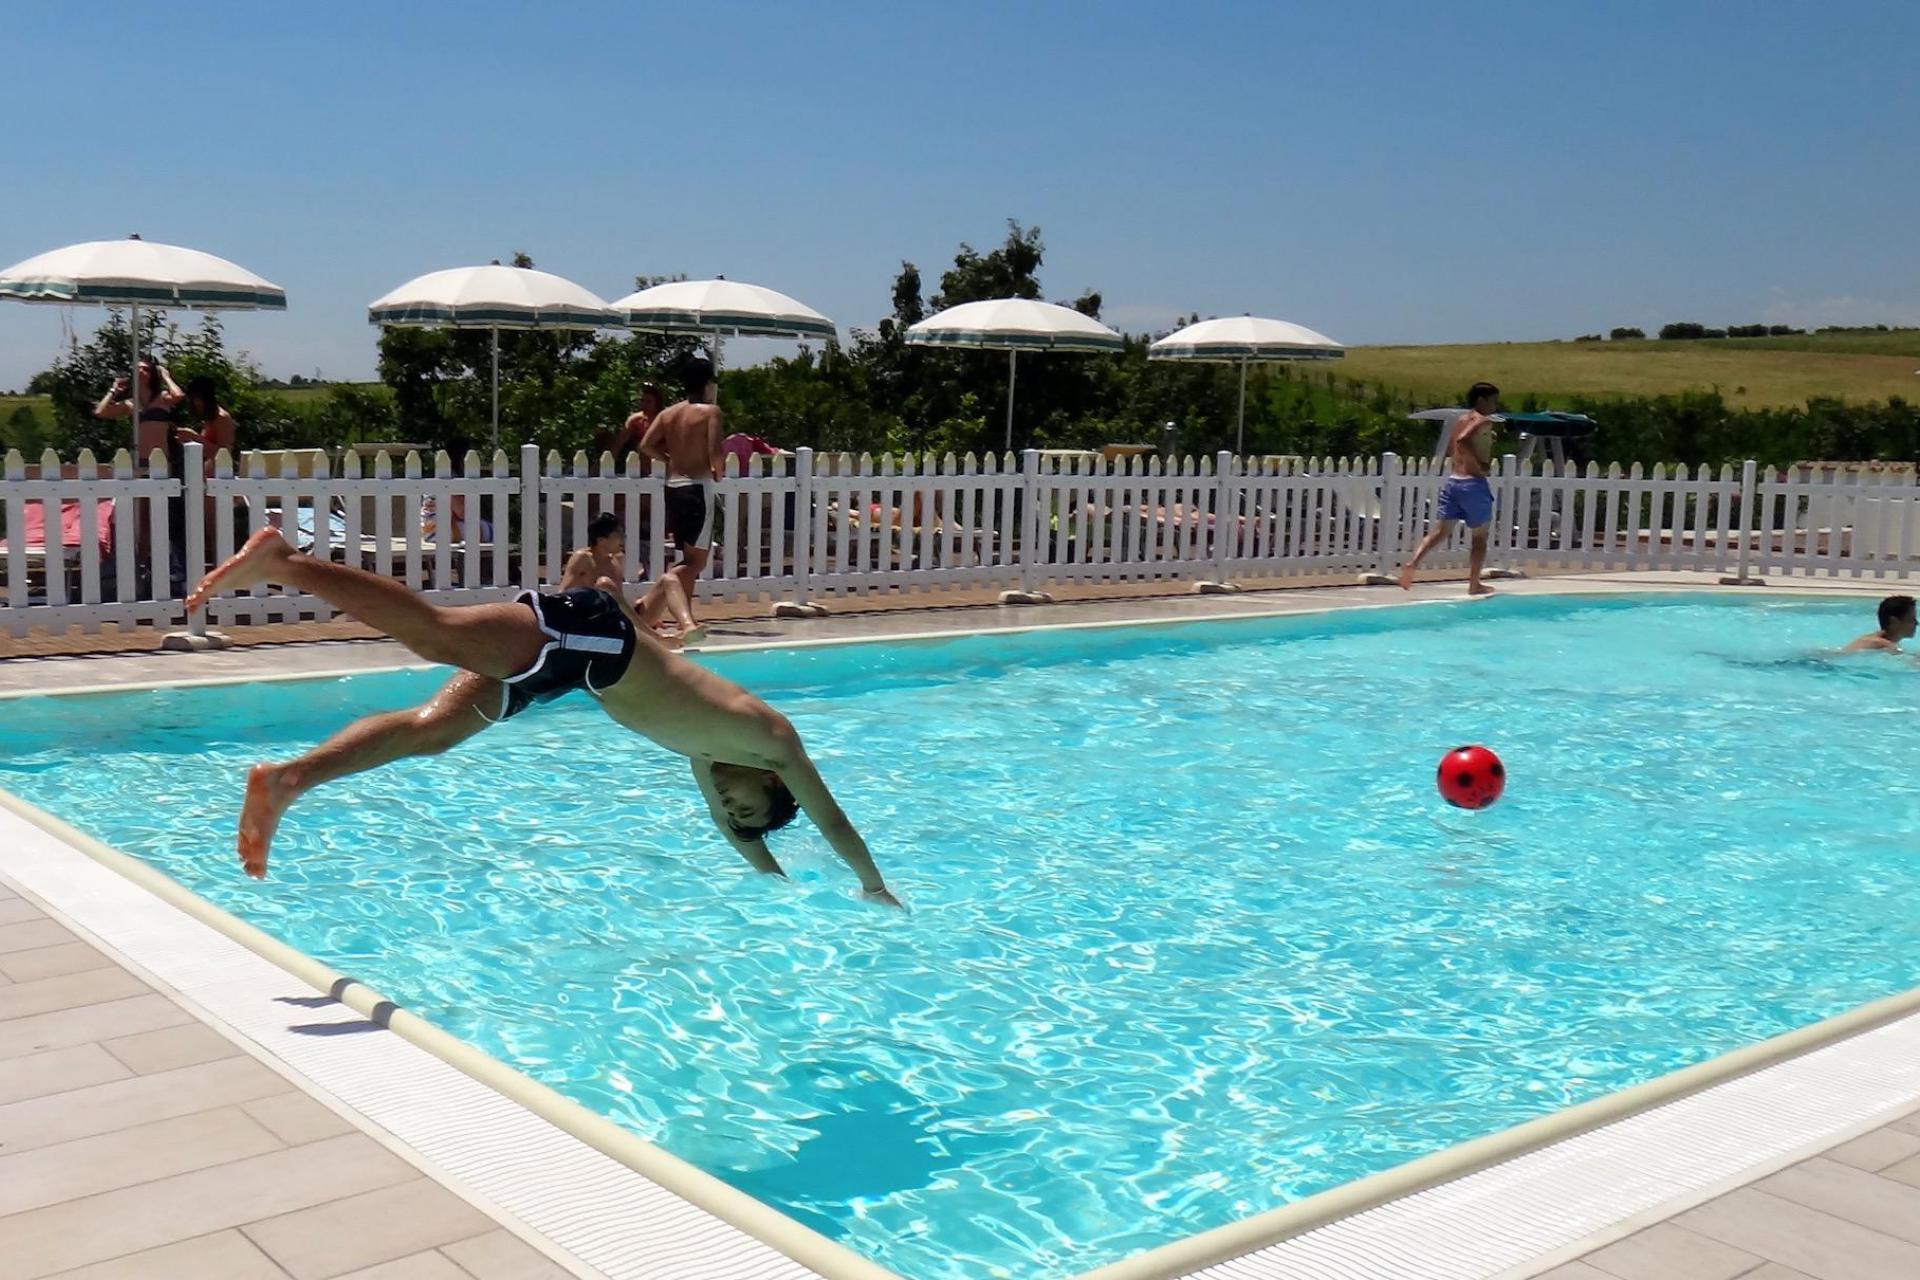 Agriturismo Marche Child-friendly agriturismo Marche with sea view